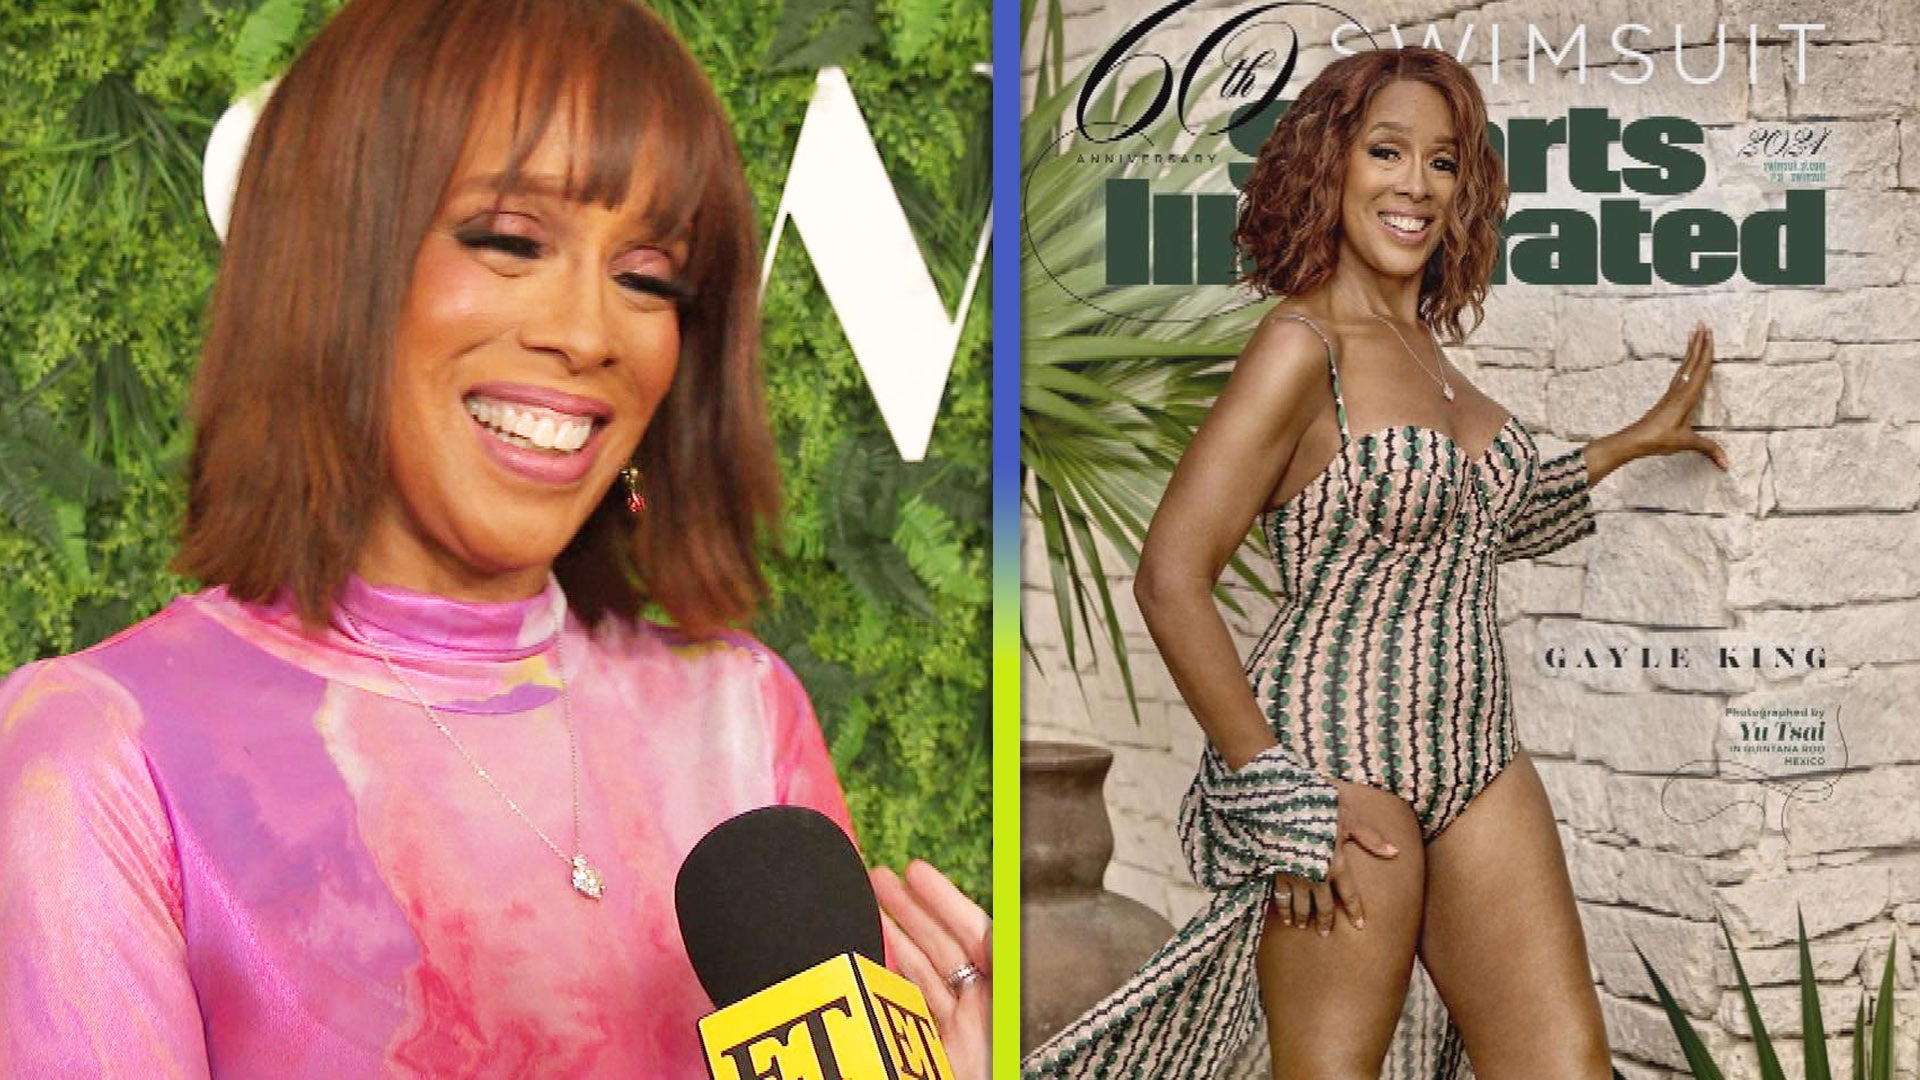 Gayle King Pokes Fun at Her Ex-Husband as She Celebrates 'Sports Illustrated' Cover